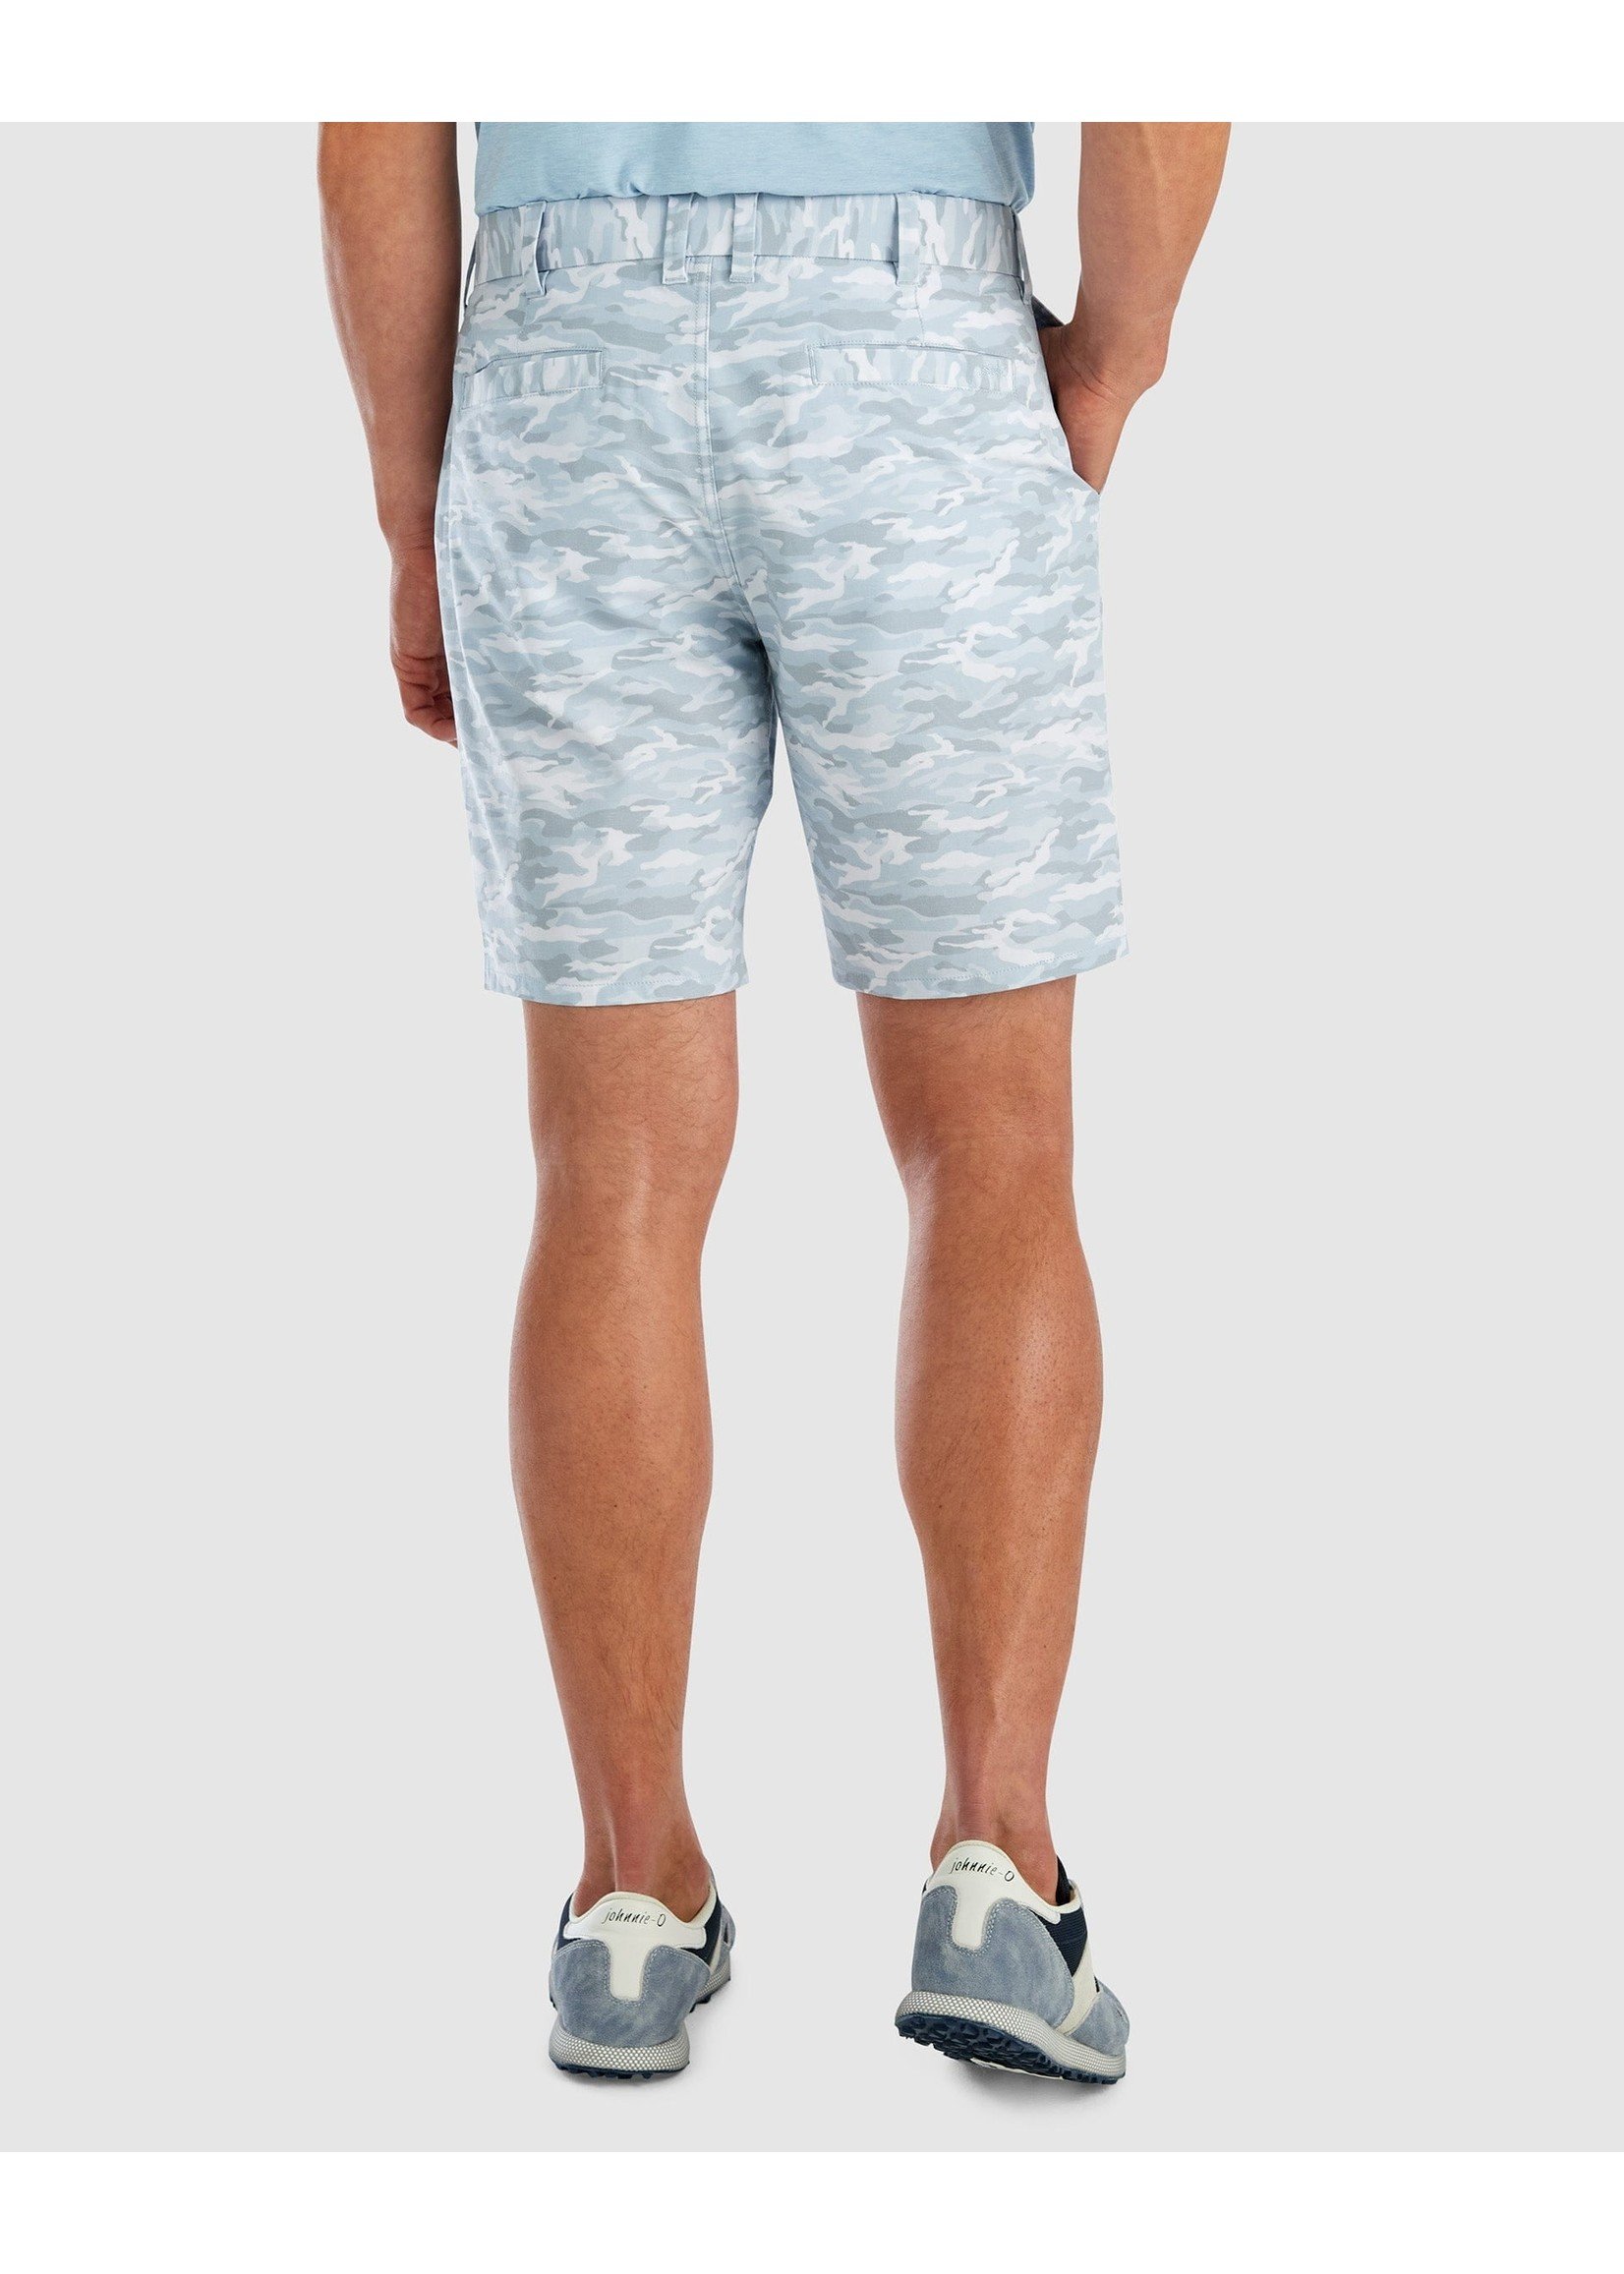 JOHNNIE-O Claymore Prep-Formance Performance Woven 9" Shorts in Chrome Camo JMSH1980